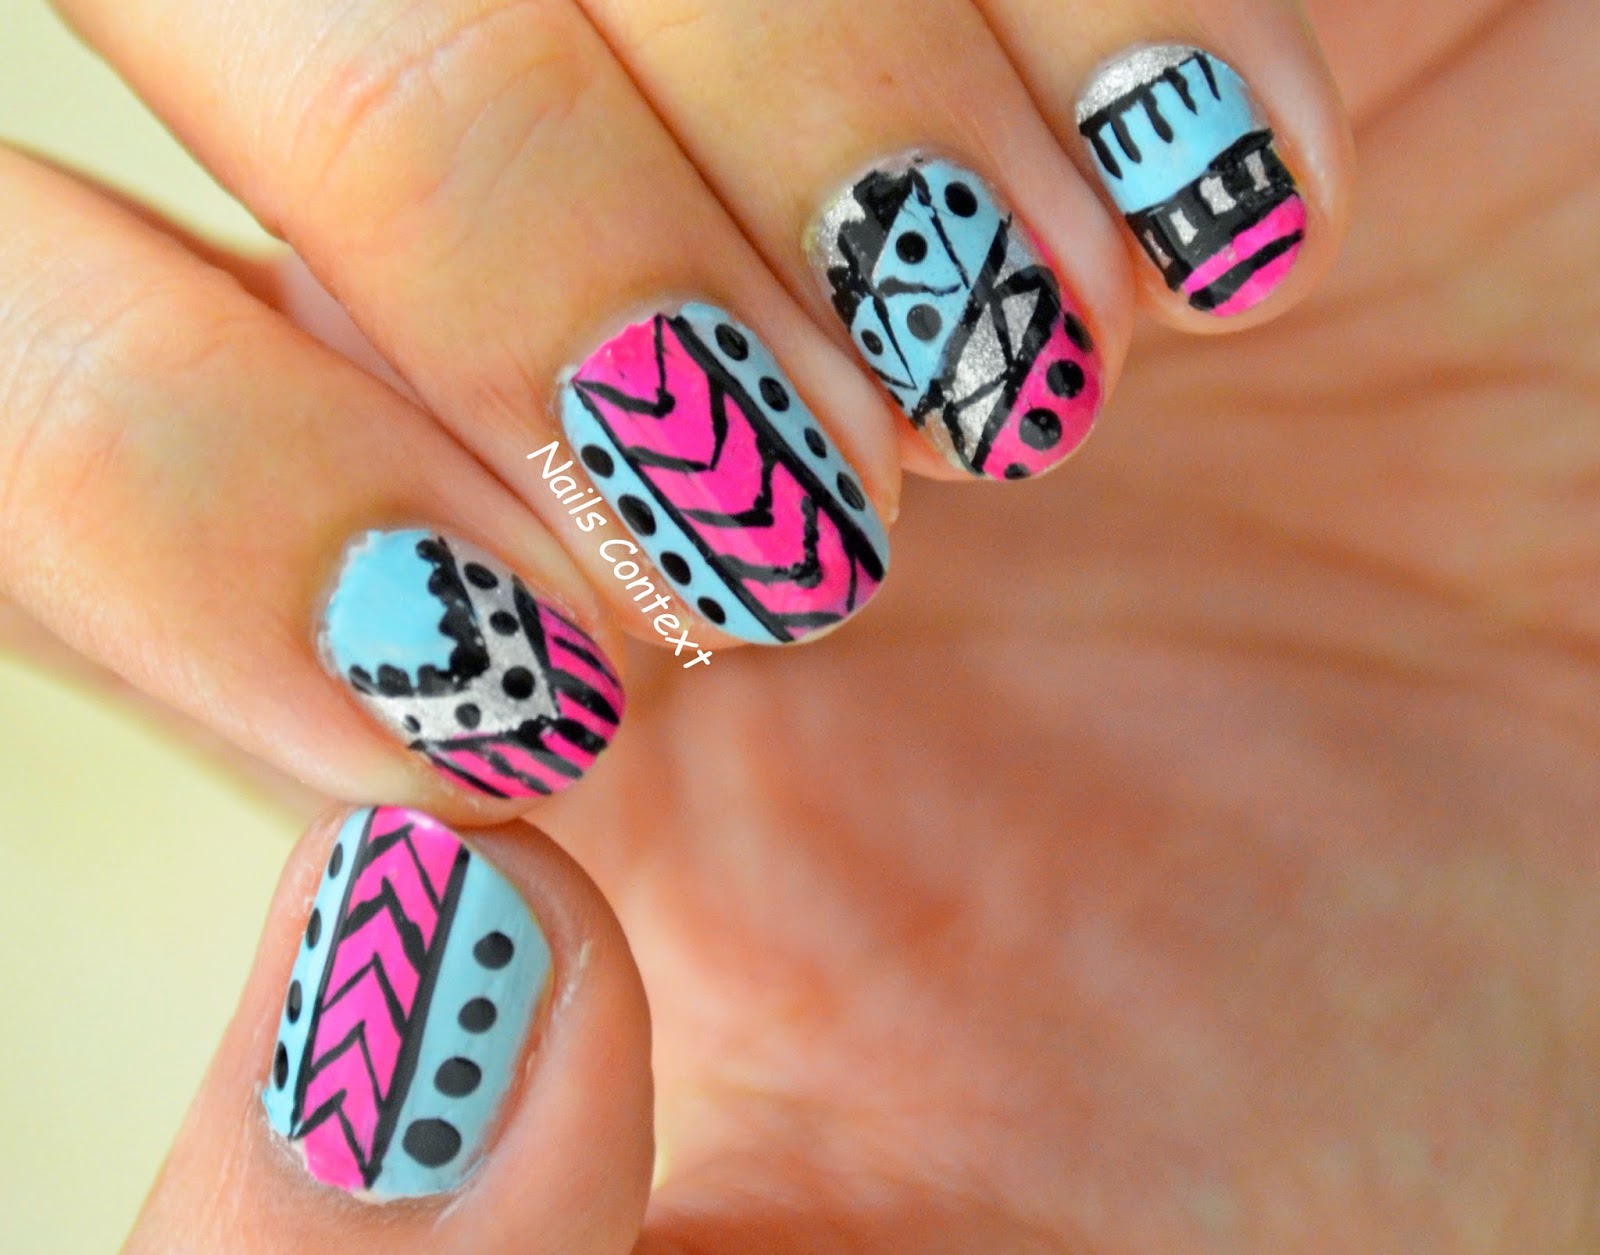 4. Tribal Nail Art Ideas and Inspiration - wide 3